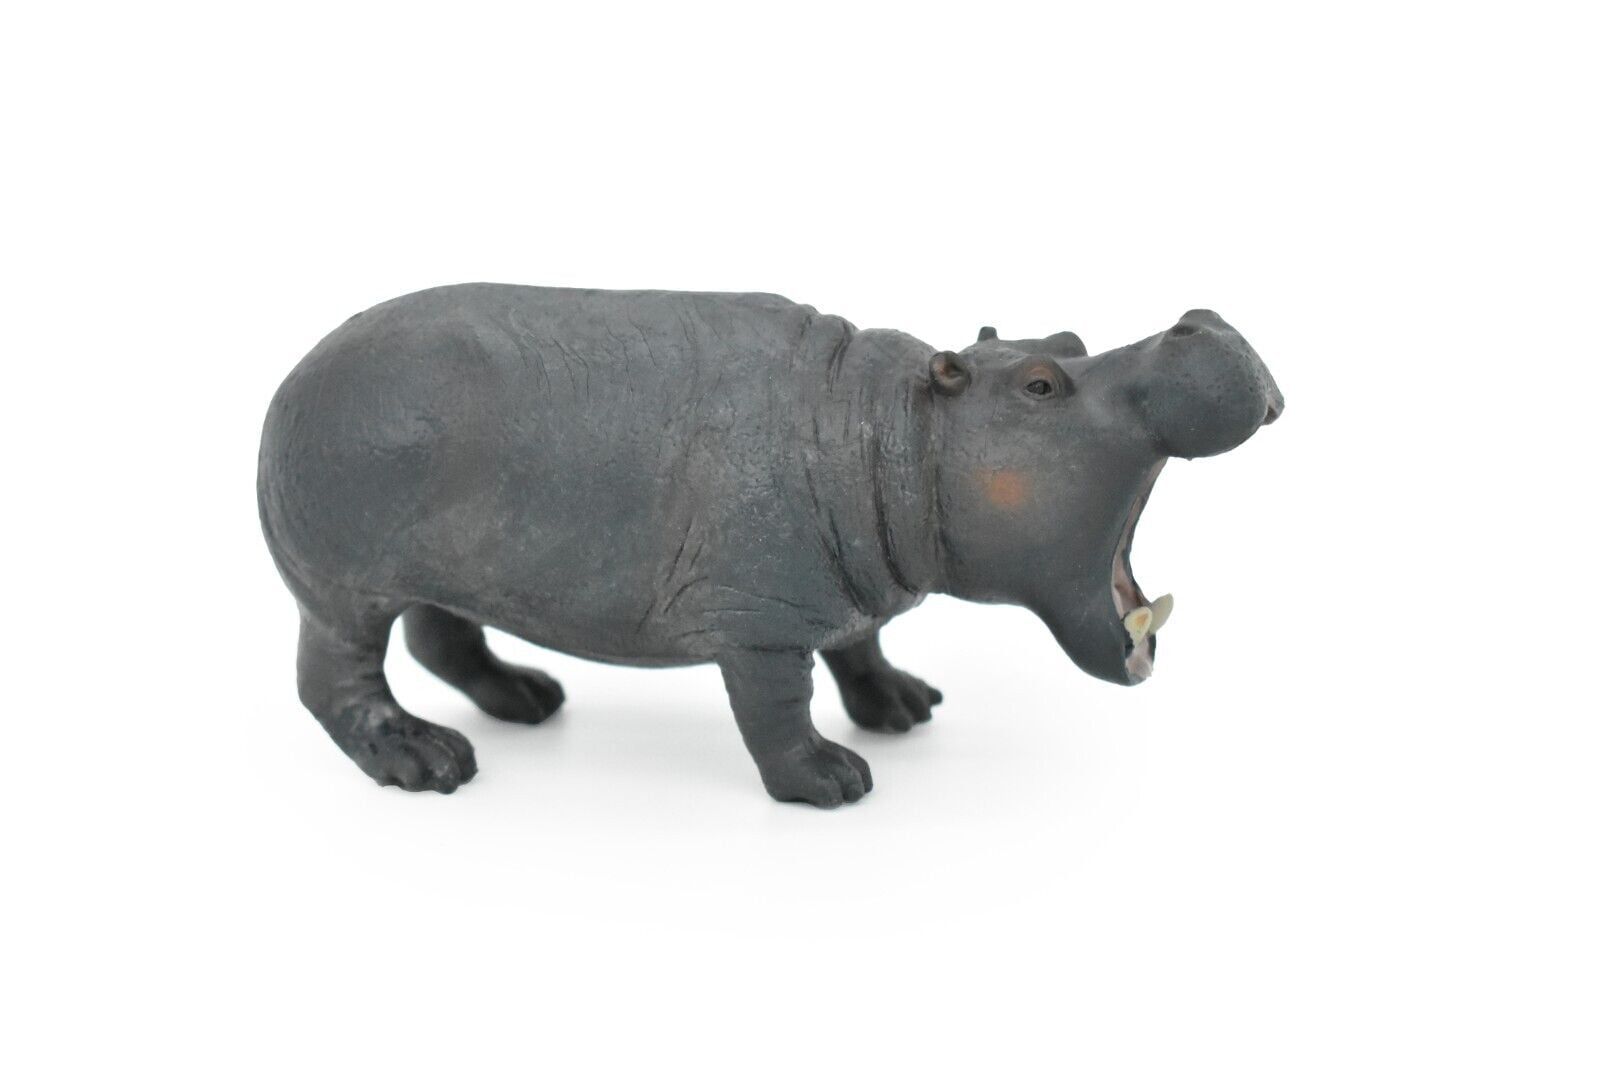 Warmtree Simulated Hippo Model Realistic Plastic Hippo Figurines Action  Figure for Kids' Collection Science Educational Toy, Set of 5 price in UAE,  UAE